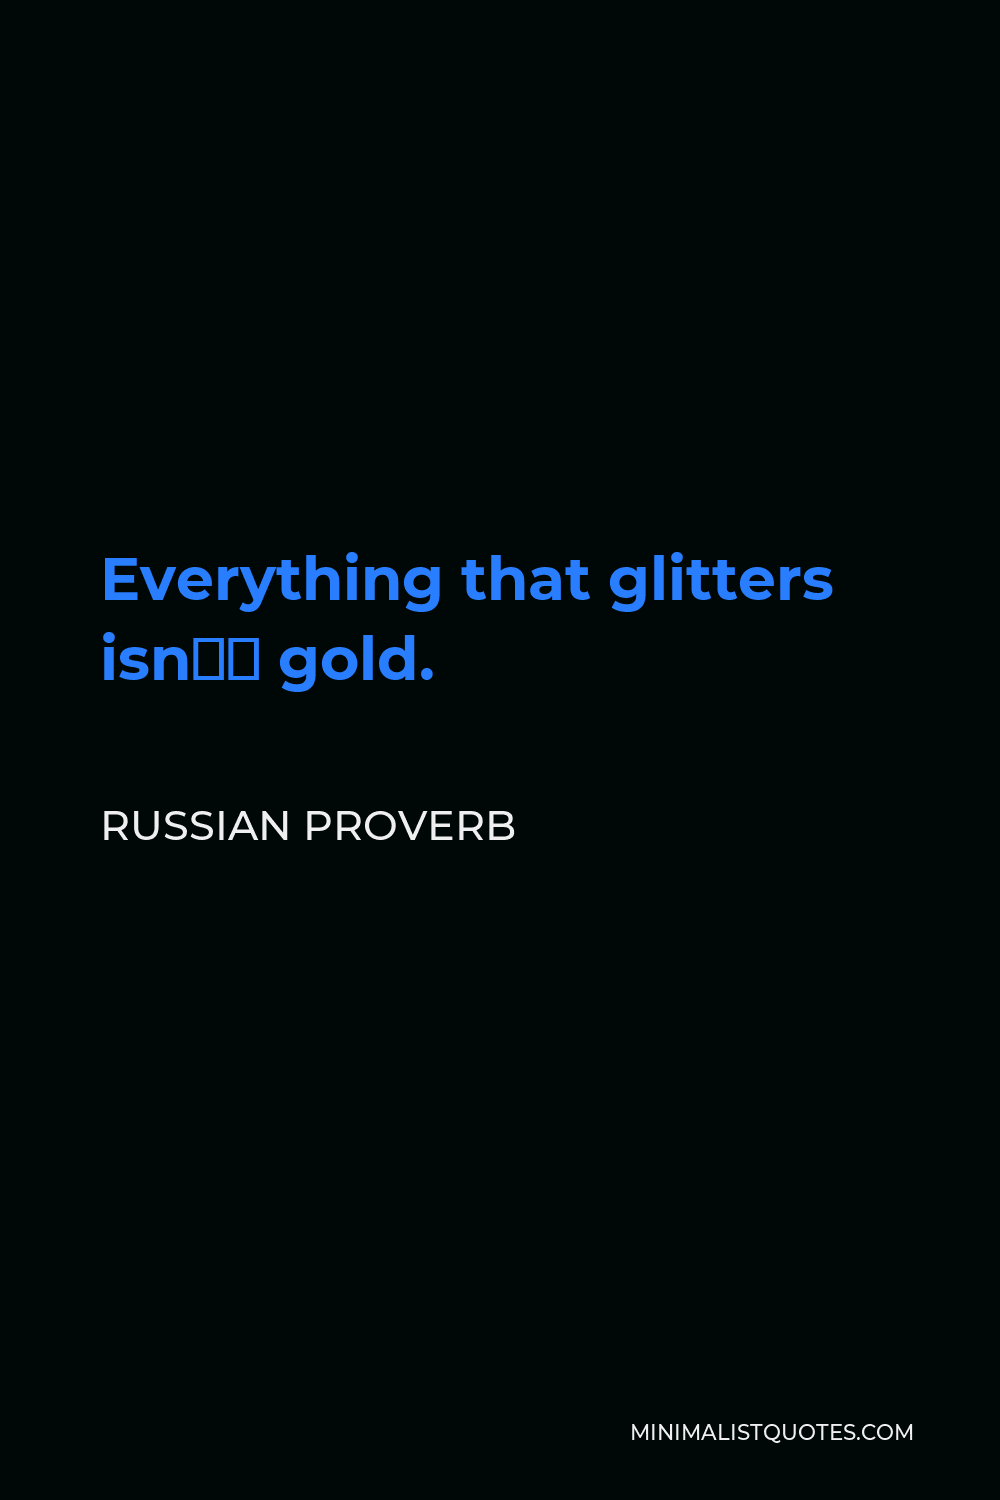 Russian Proverb Quote - Everything that glitters isn’t gold.